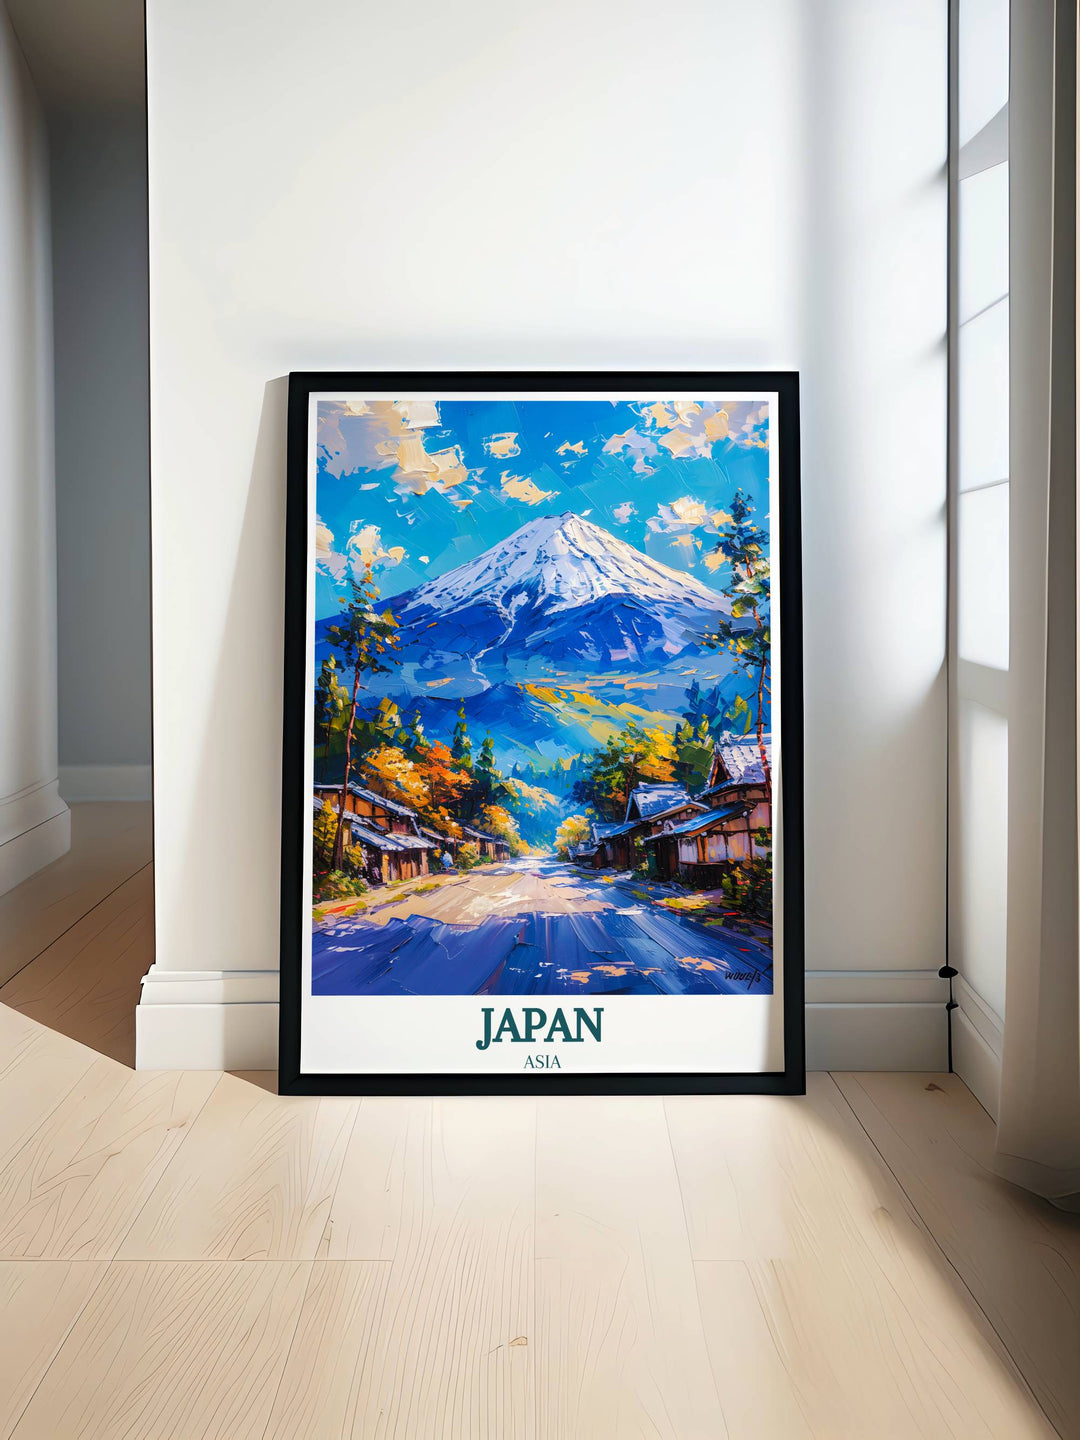 Japan travel print featuring Mount Fuji, perfect for adorning walls with Japanese charm, ideal for art lovers.